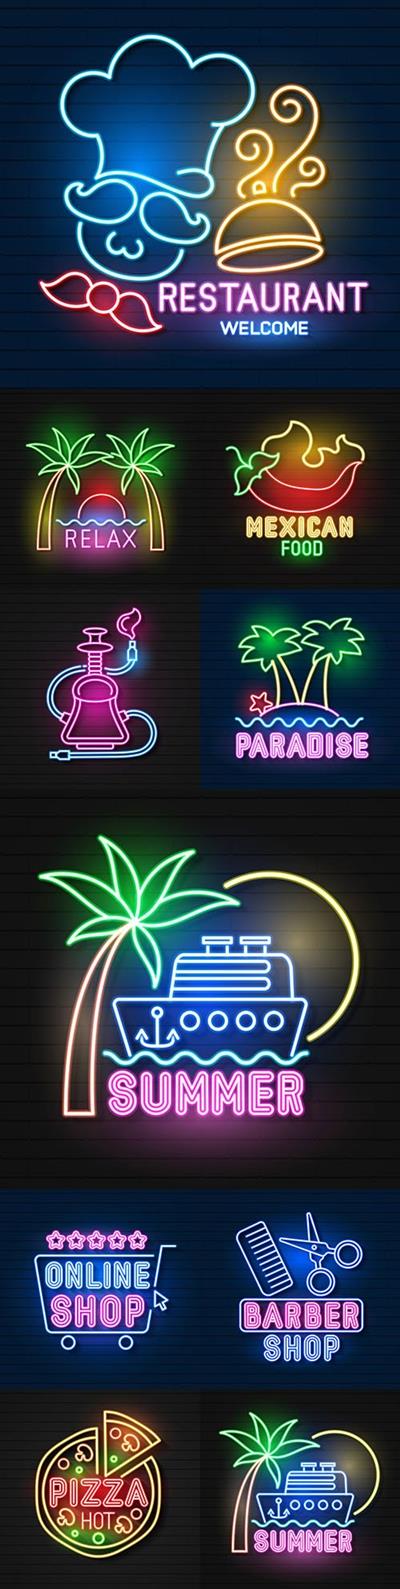 Neon signage and logo vector for your design